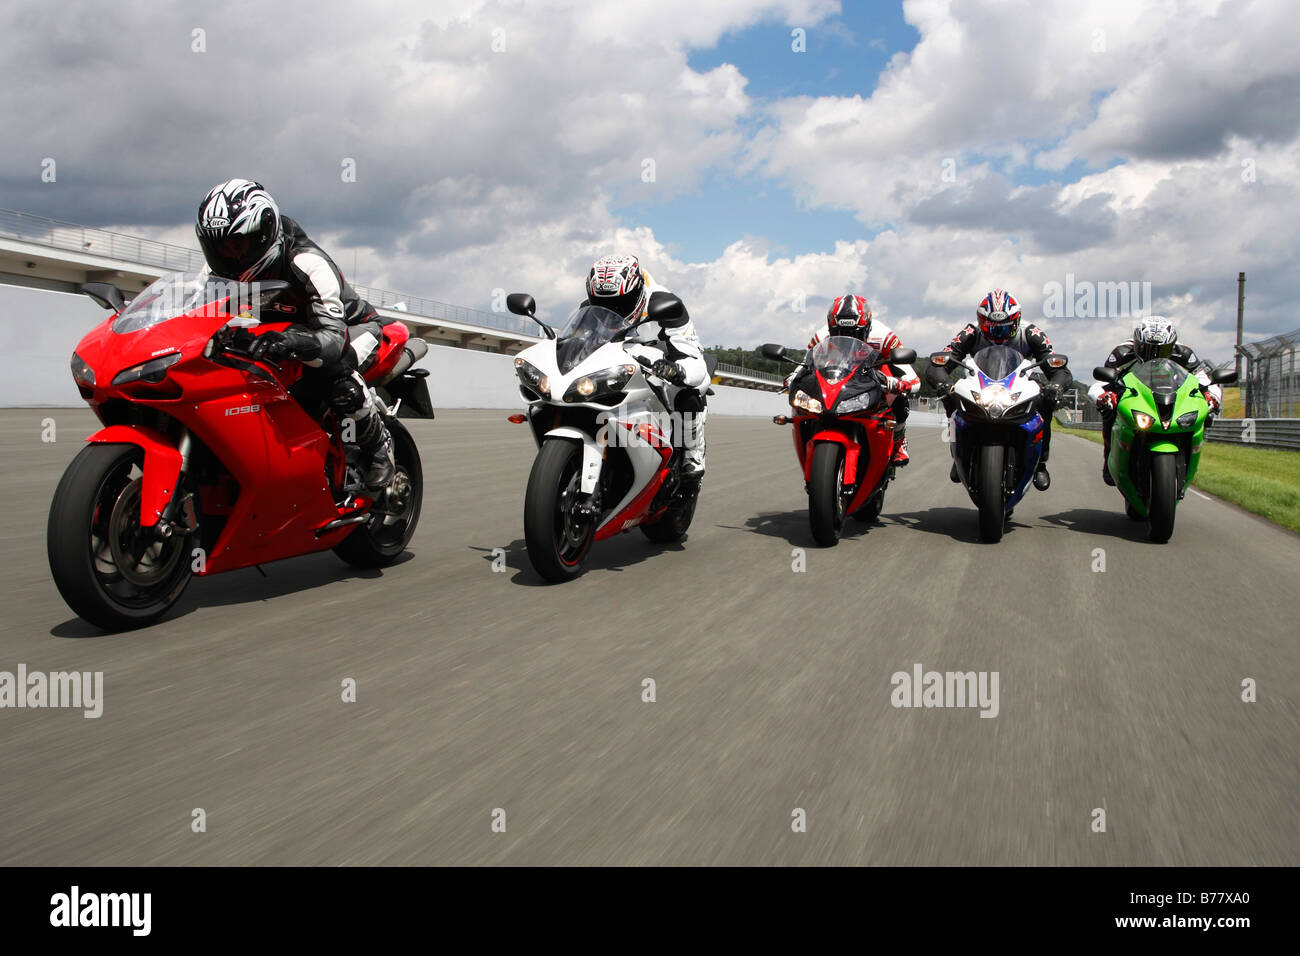 Motorcycles on a racing course Stock Photo